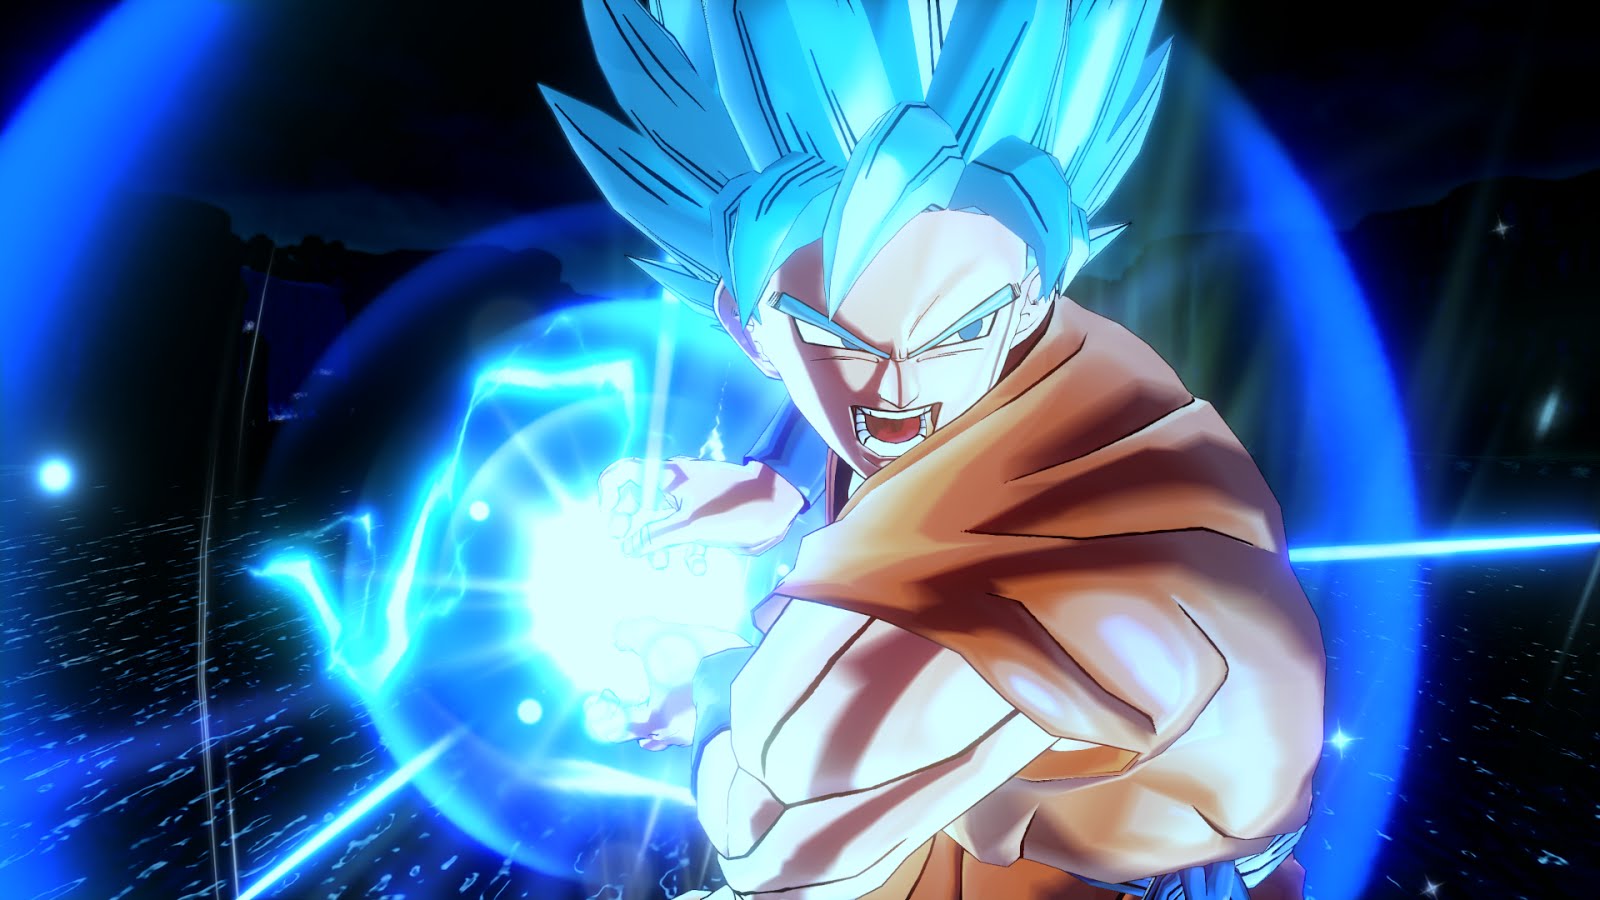 Dragon Ball Xenoverse 2 on the PS4 | It's time to go Super Saiyan! - The Tech Revolutionist